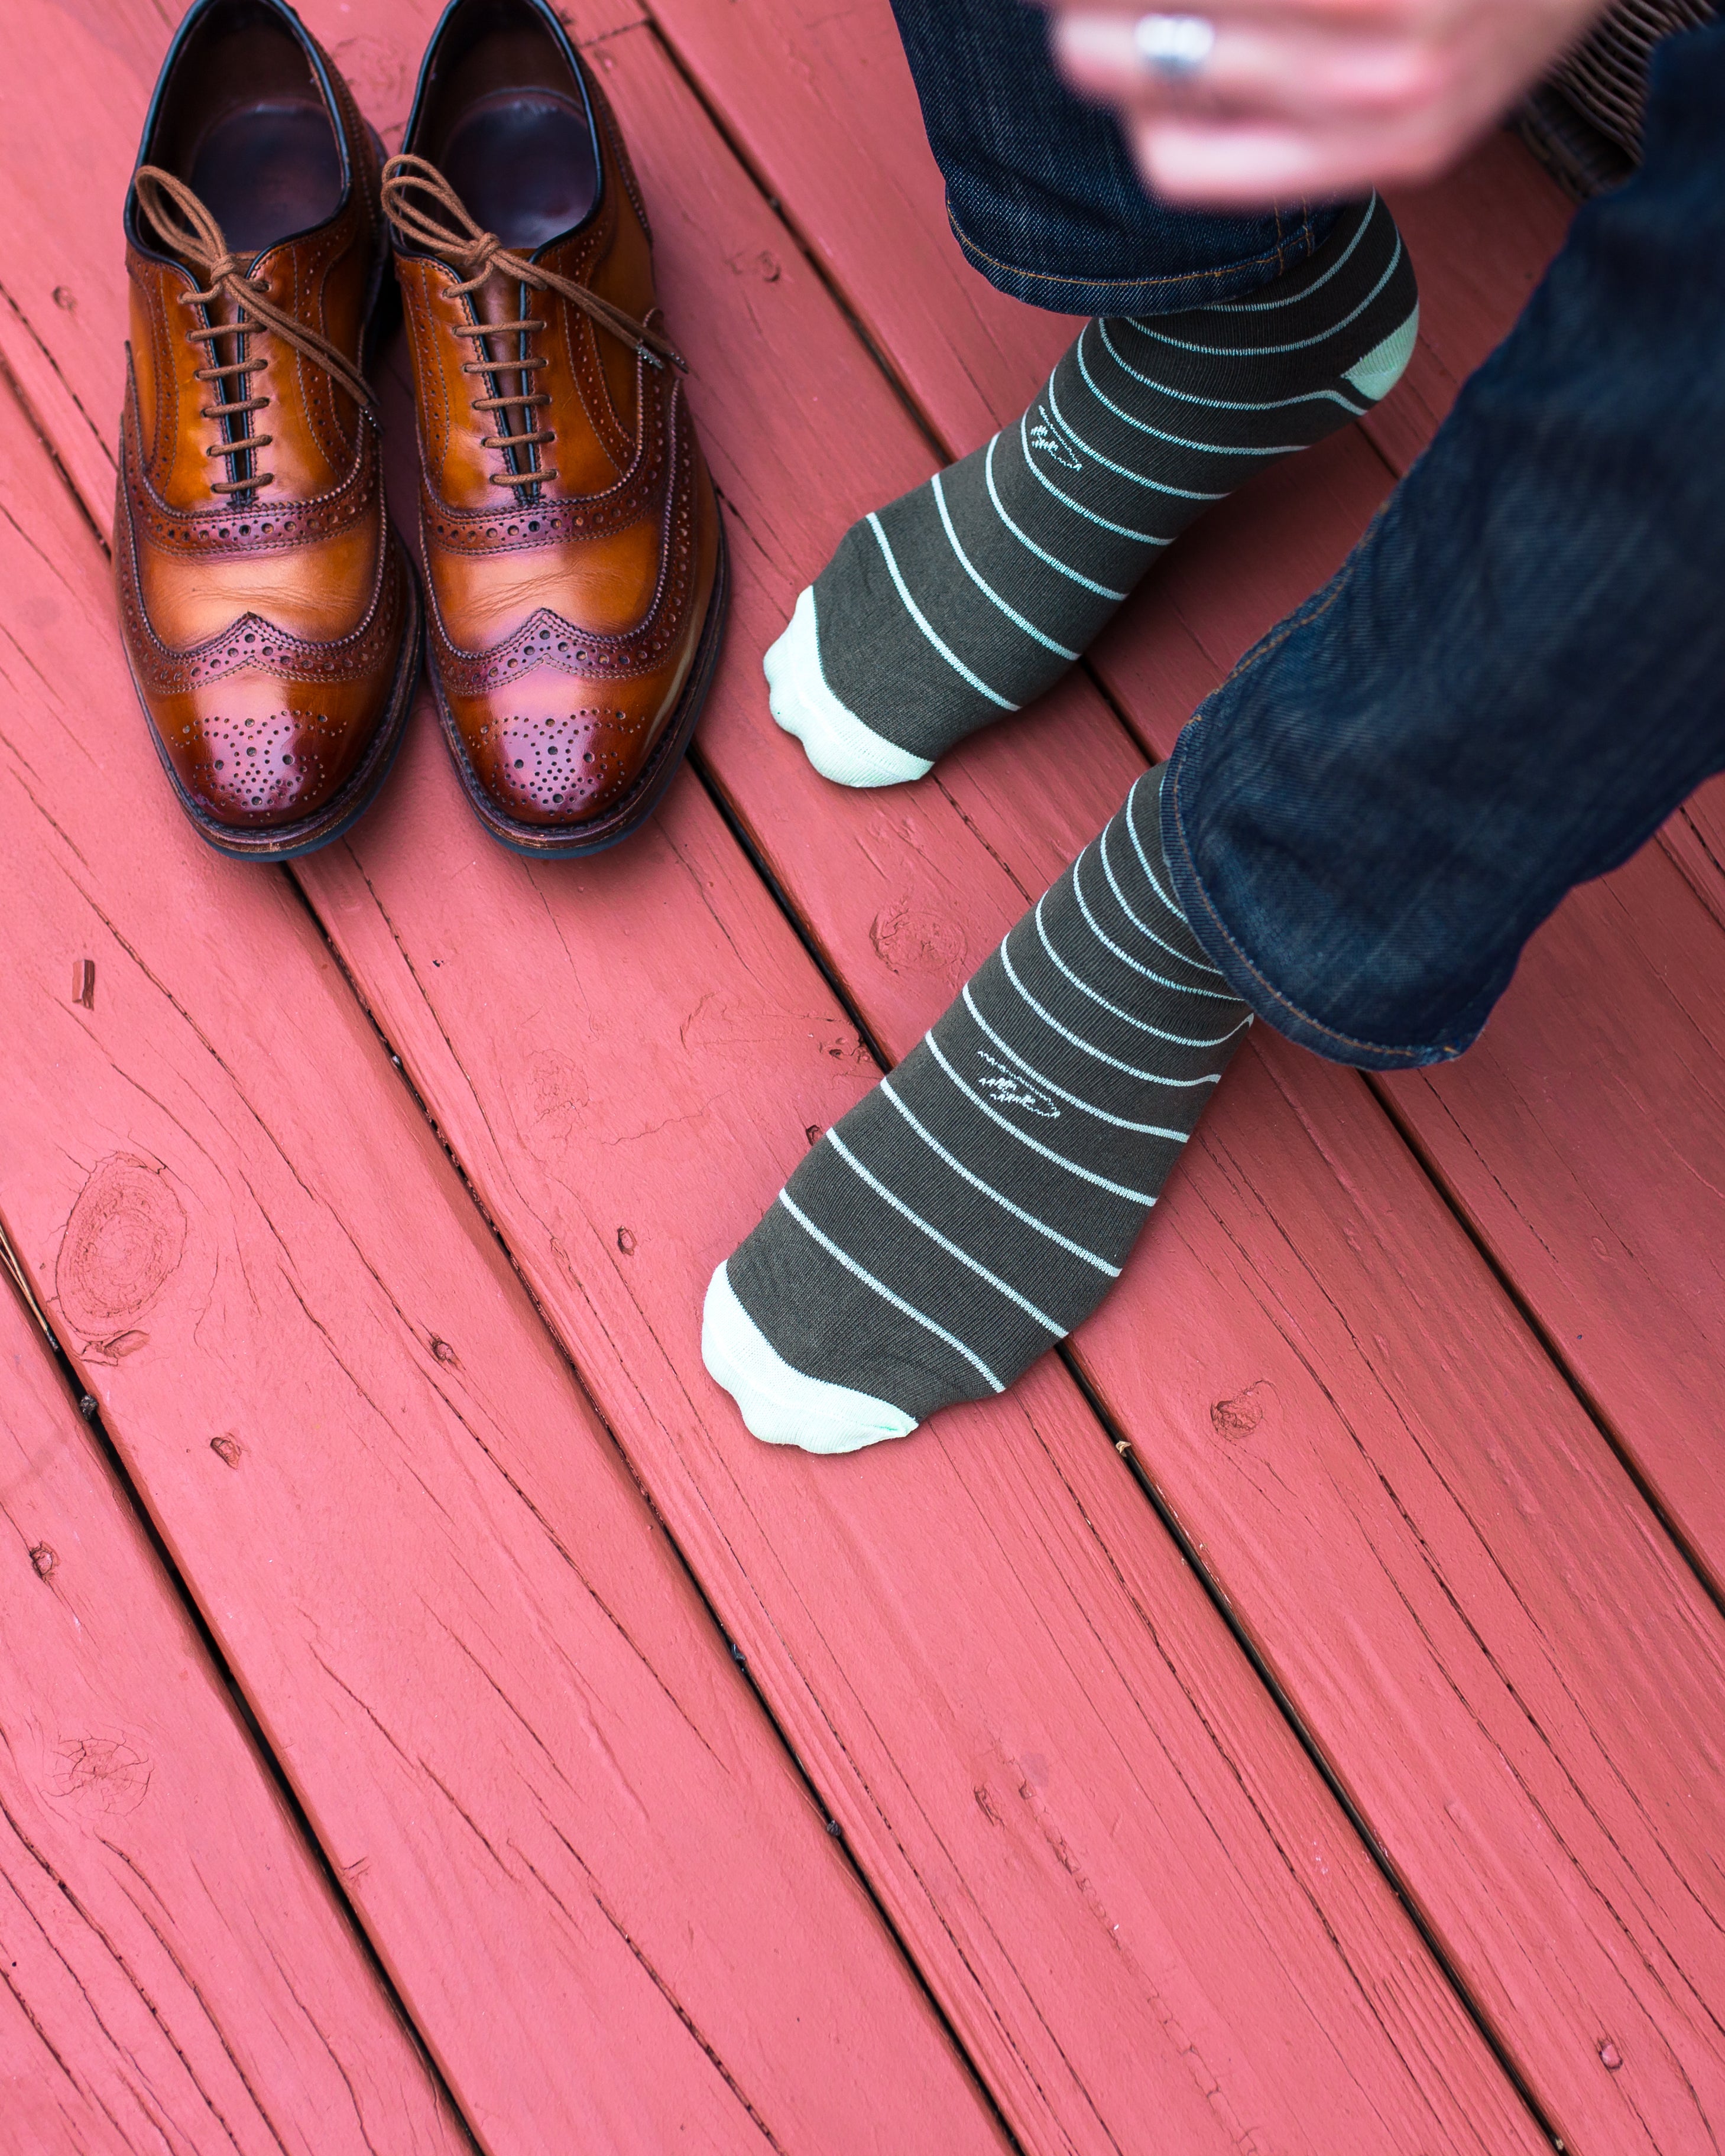 grey over the calf dress socks with light blue stripes, brown dress shoes, blue jeans